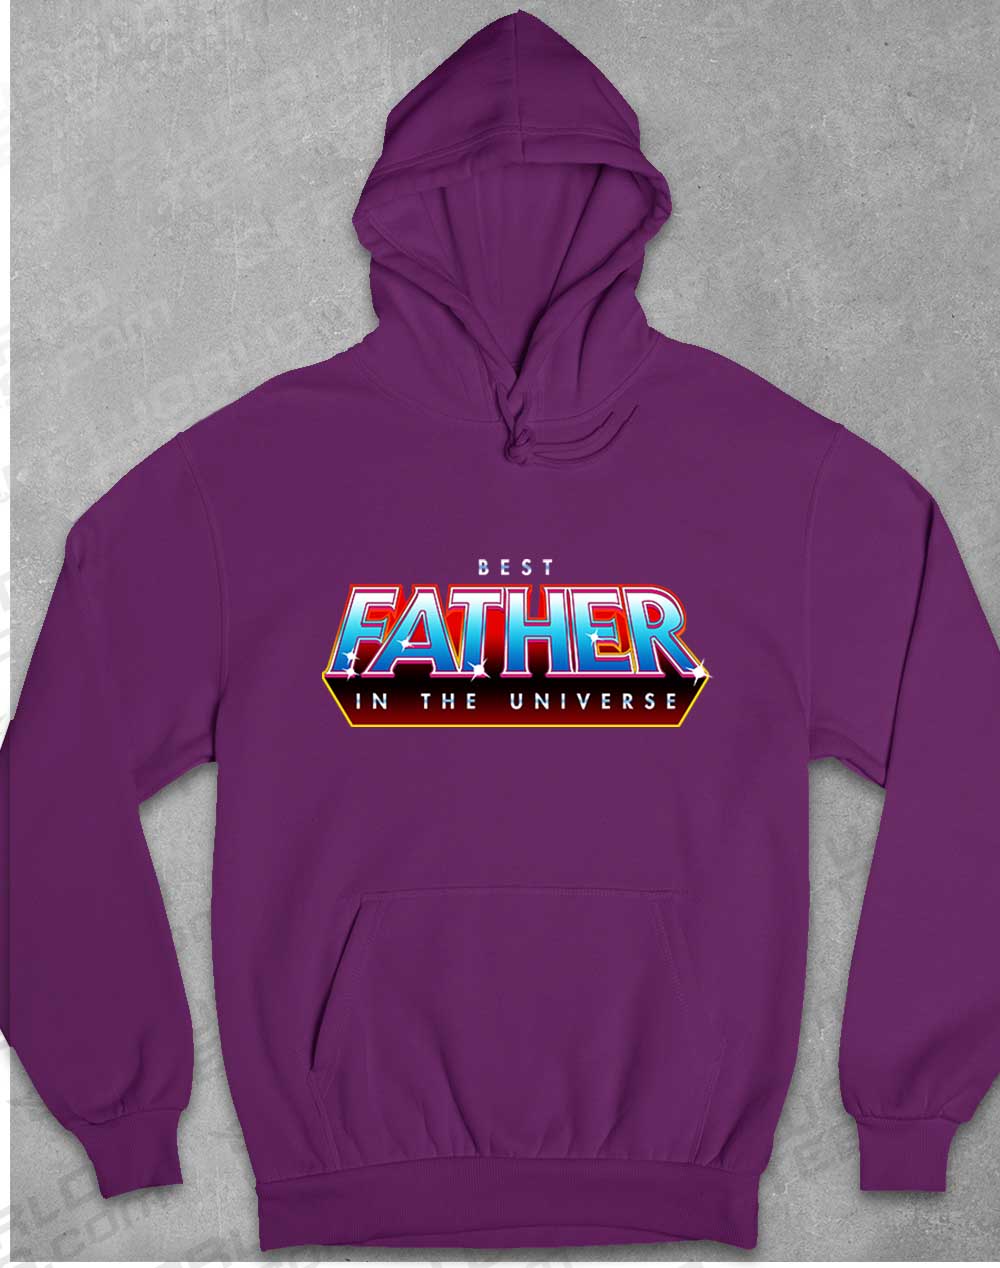 Plum - Best Father in the Universe Hoodie